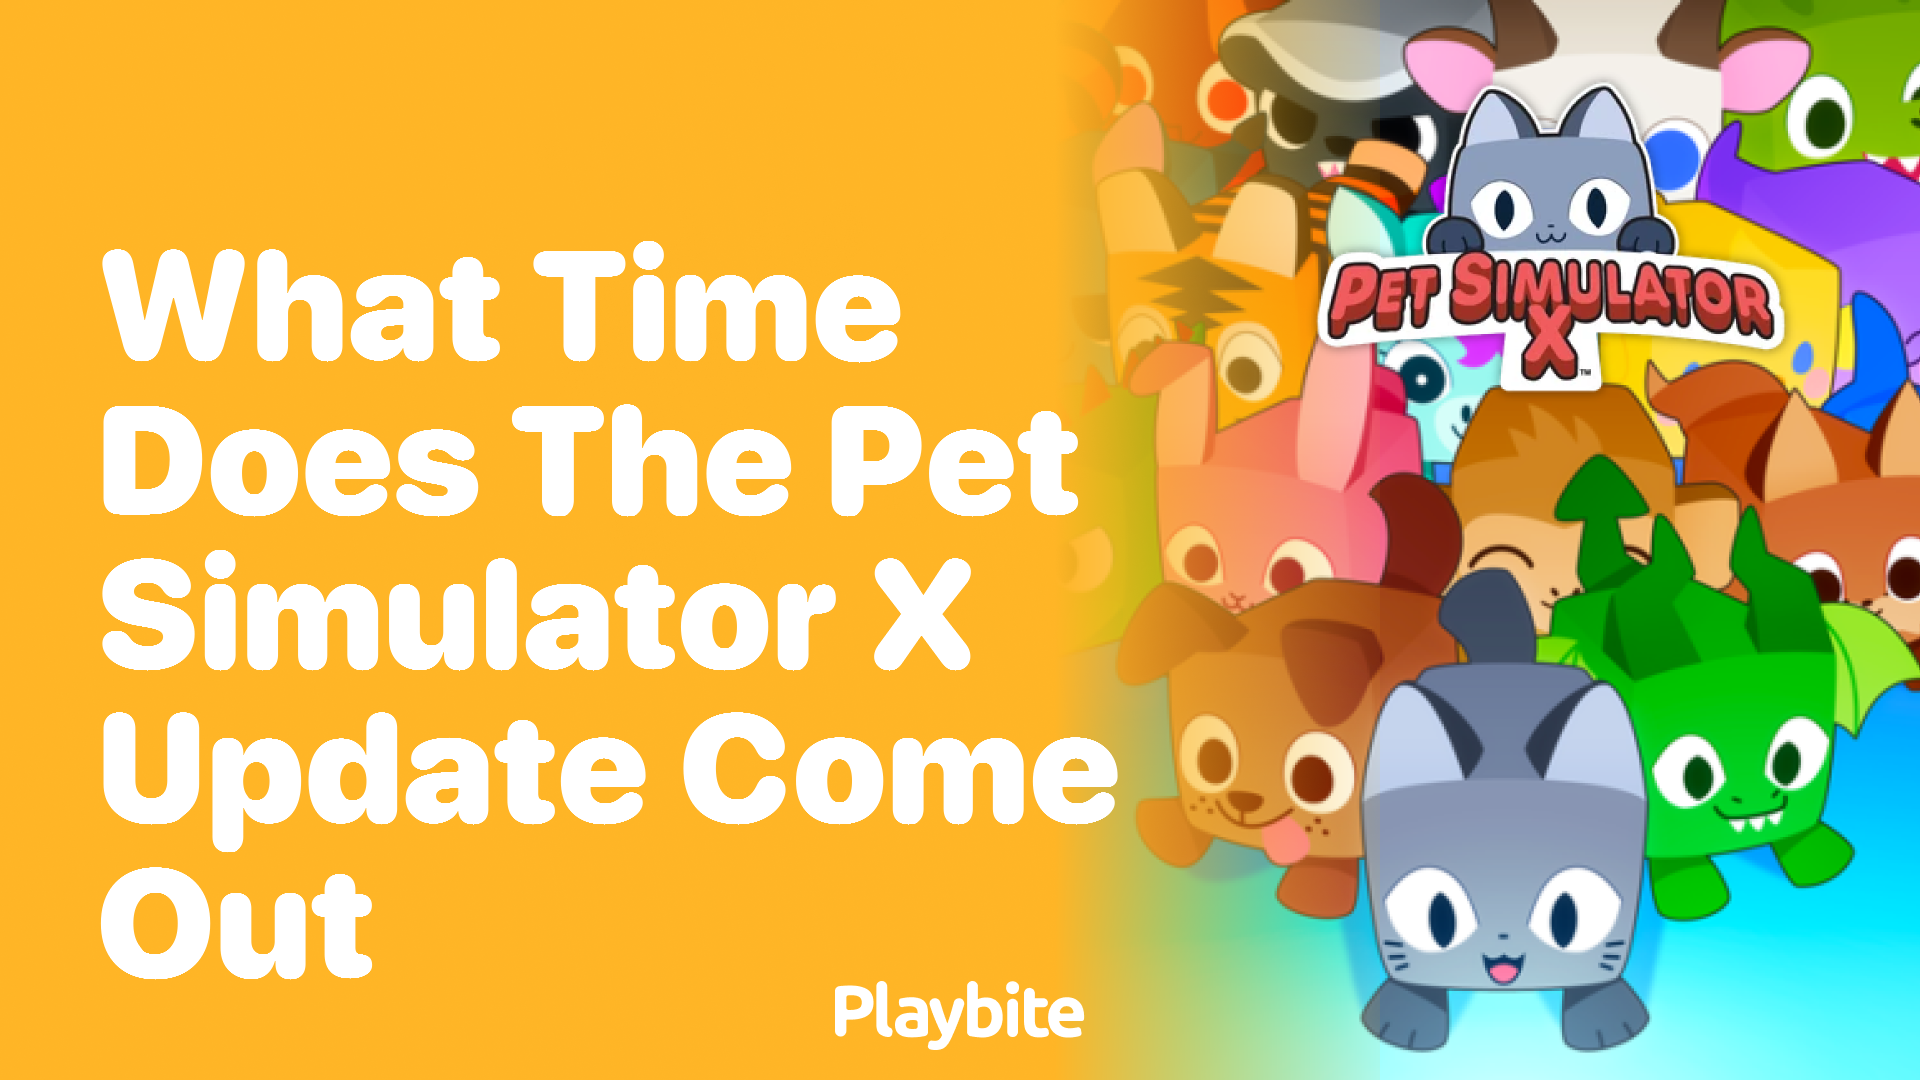 What Time Does the Pet Simulator X Update Come Out?